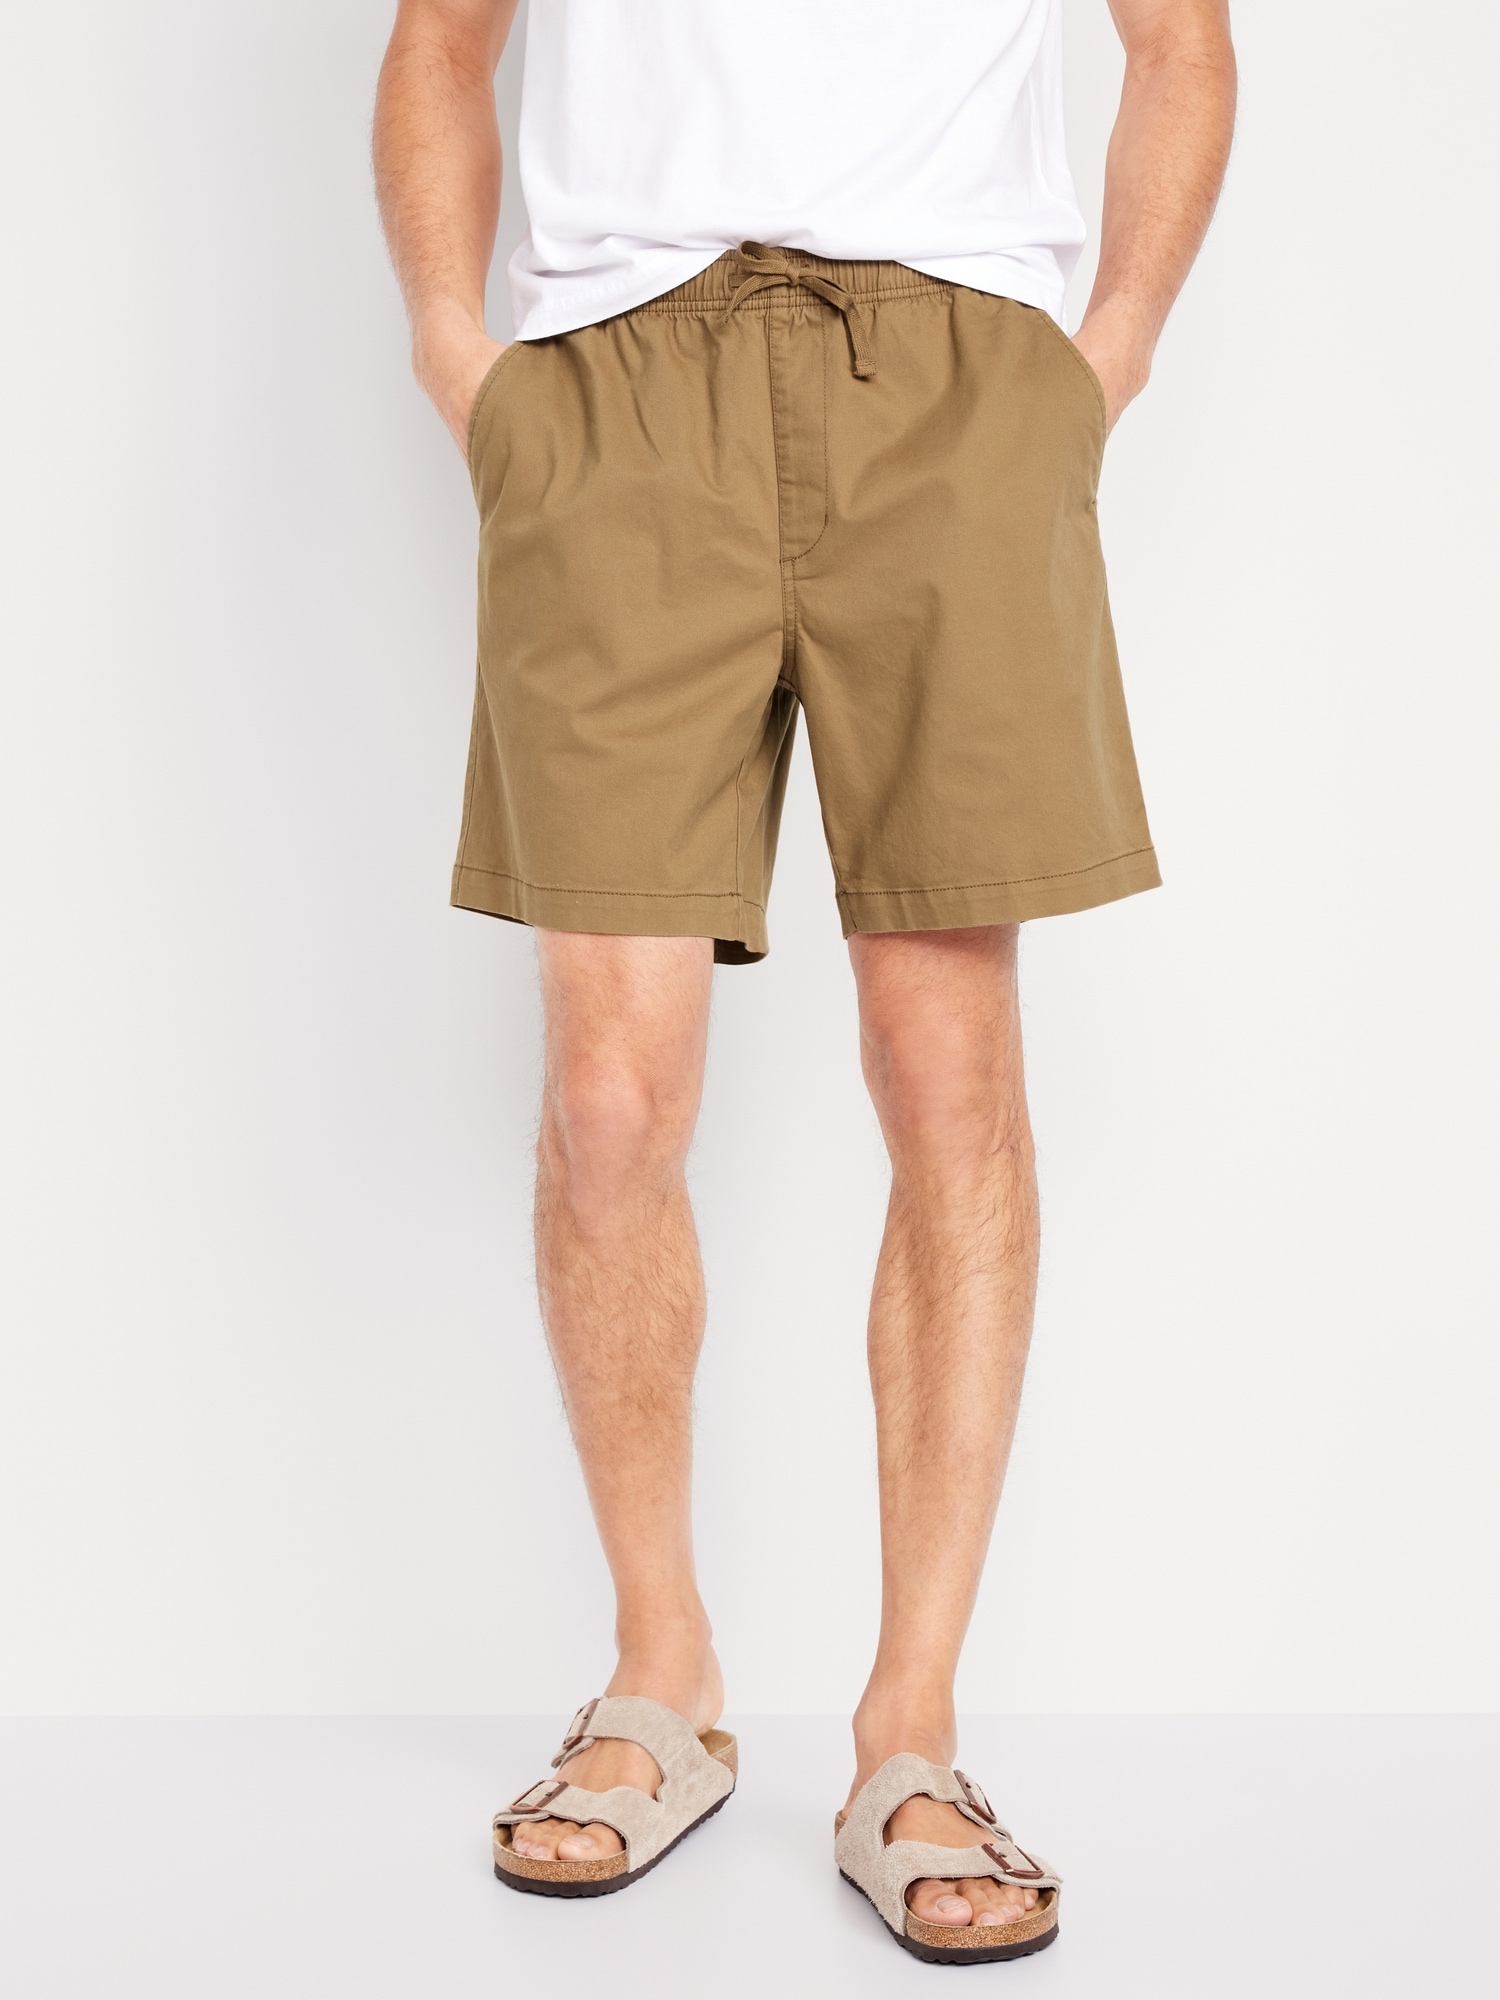 Pull-On Twill Jogger Shorts -- 7-inch inseam